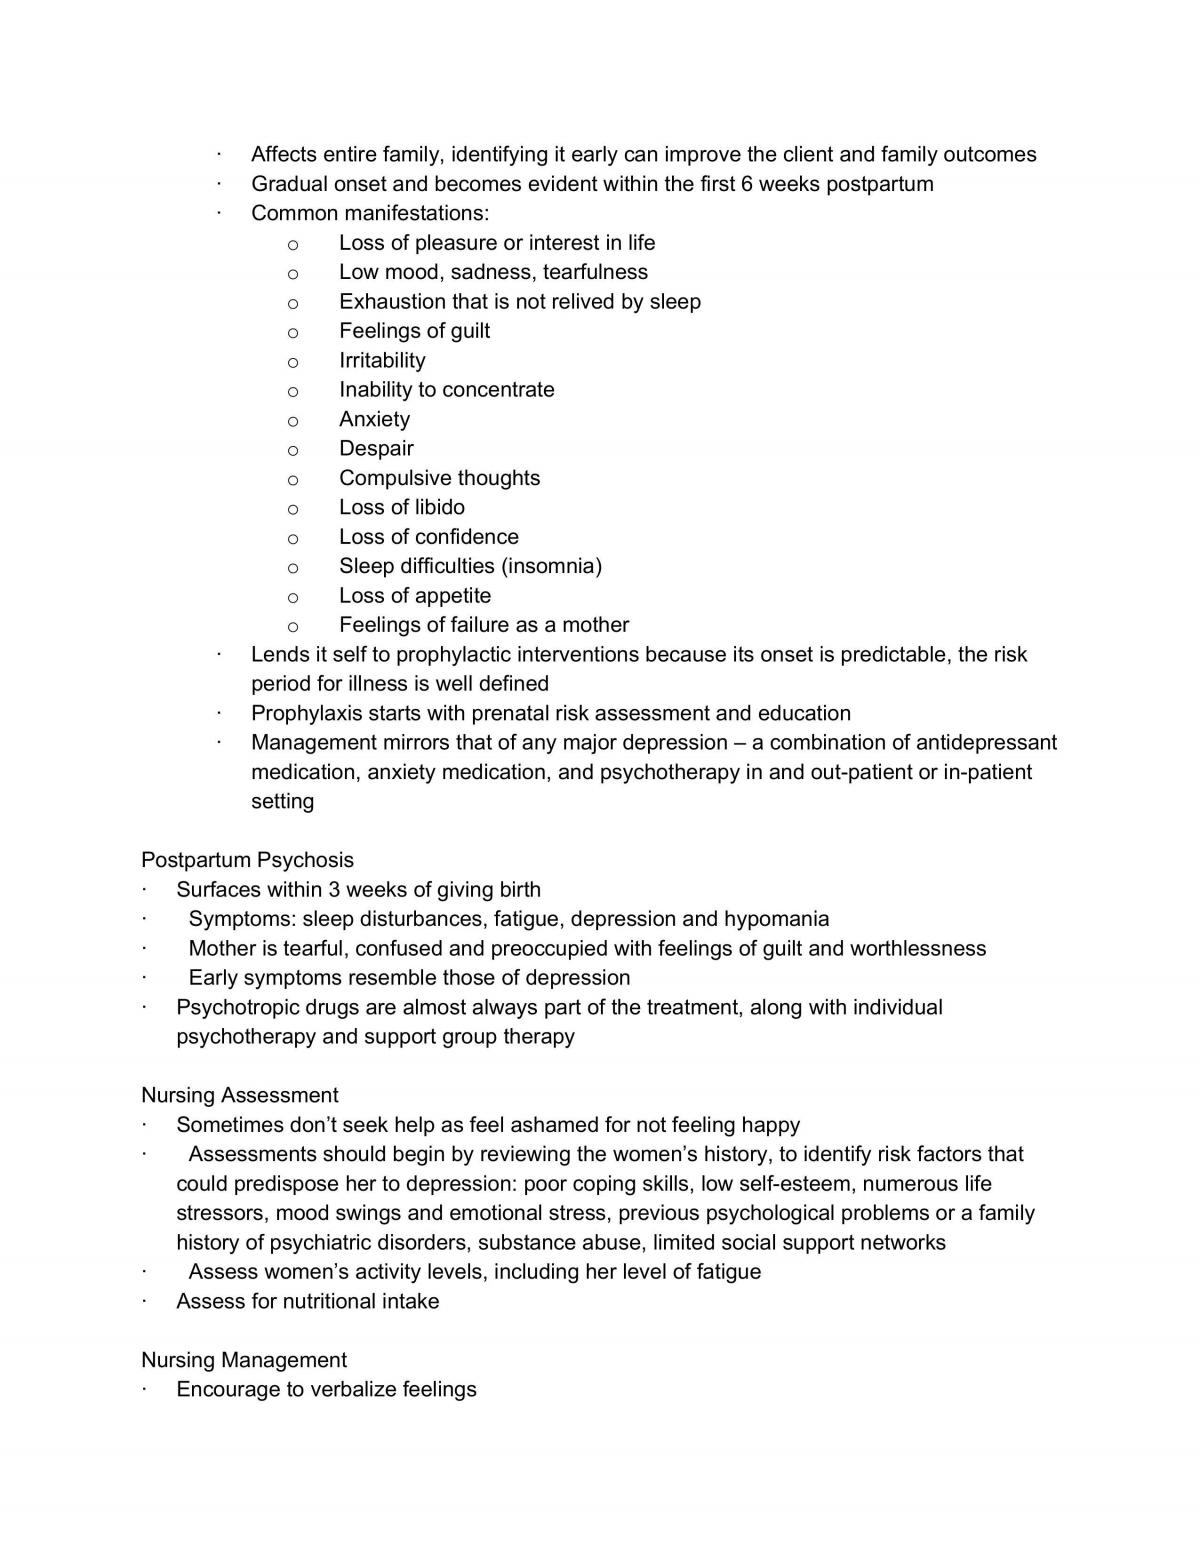 Complete Notes for Nursing Concepts in Health and Illness III - Page 32